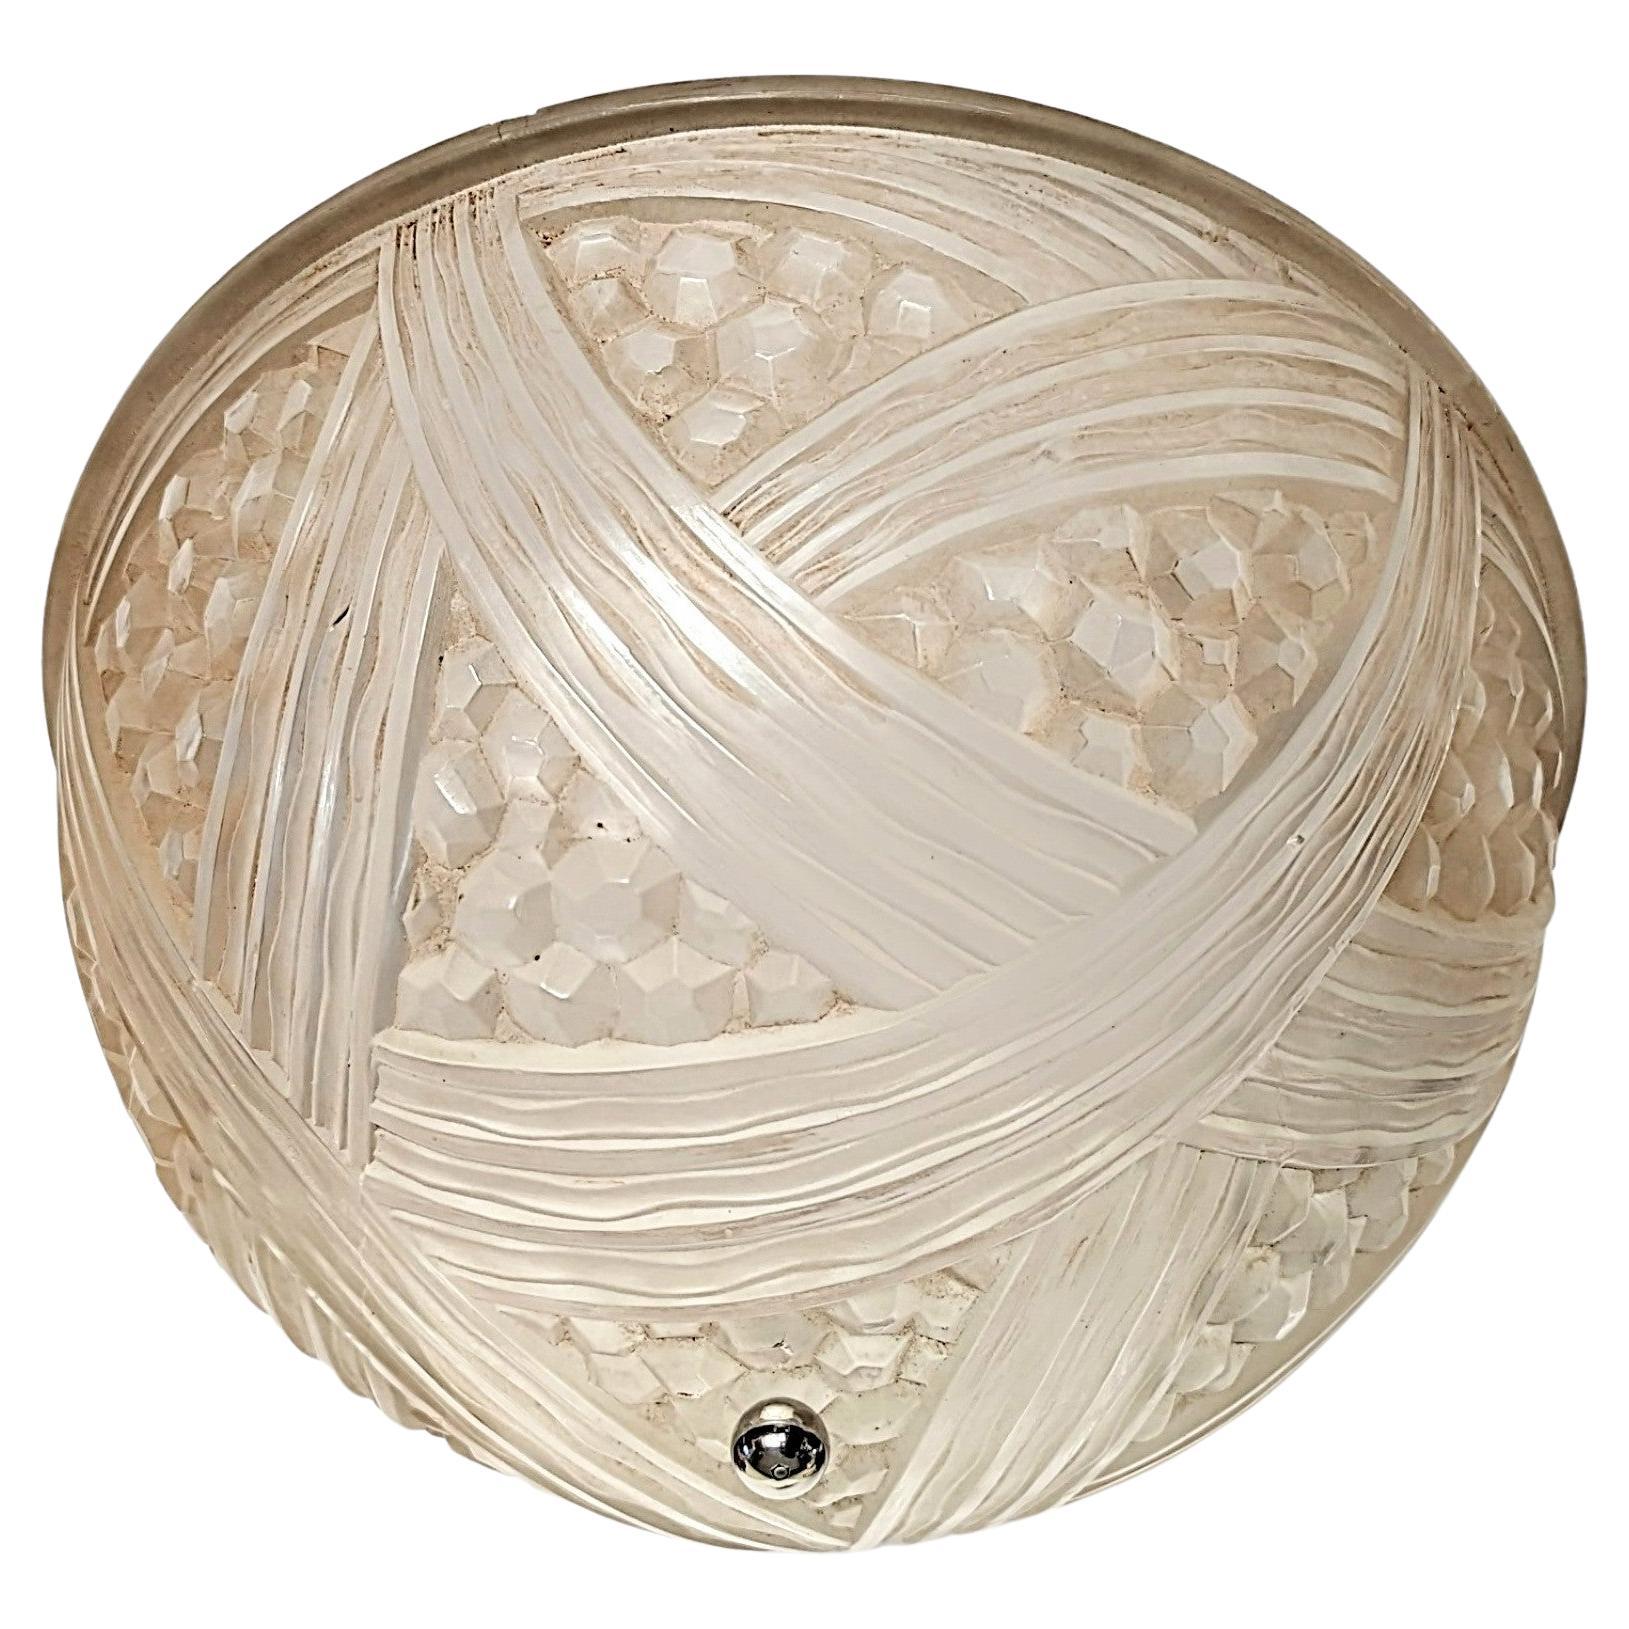 A French Art Deco flush mount was created and signed by the French artist 